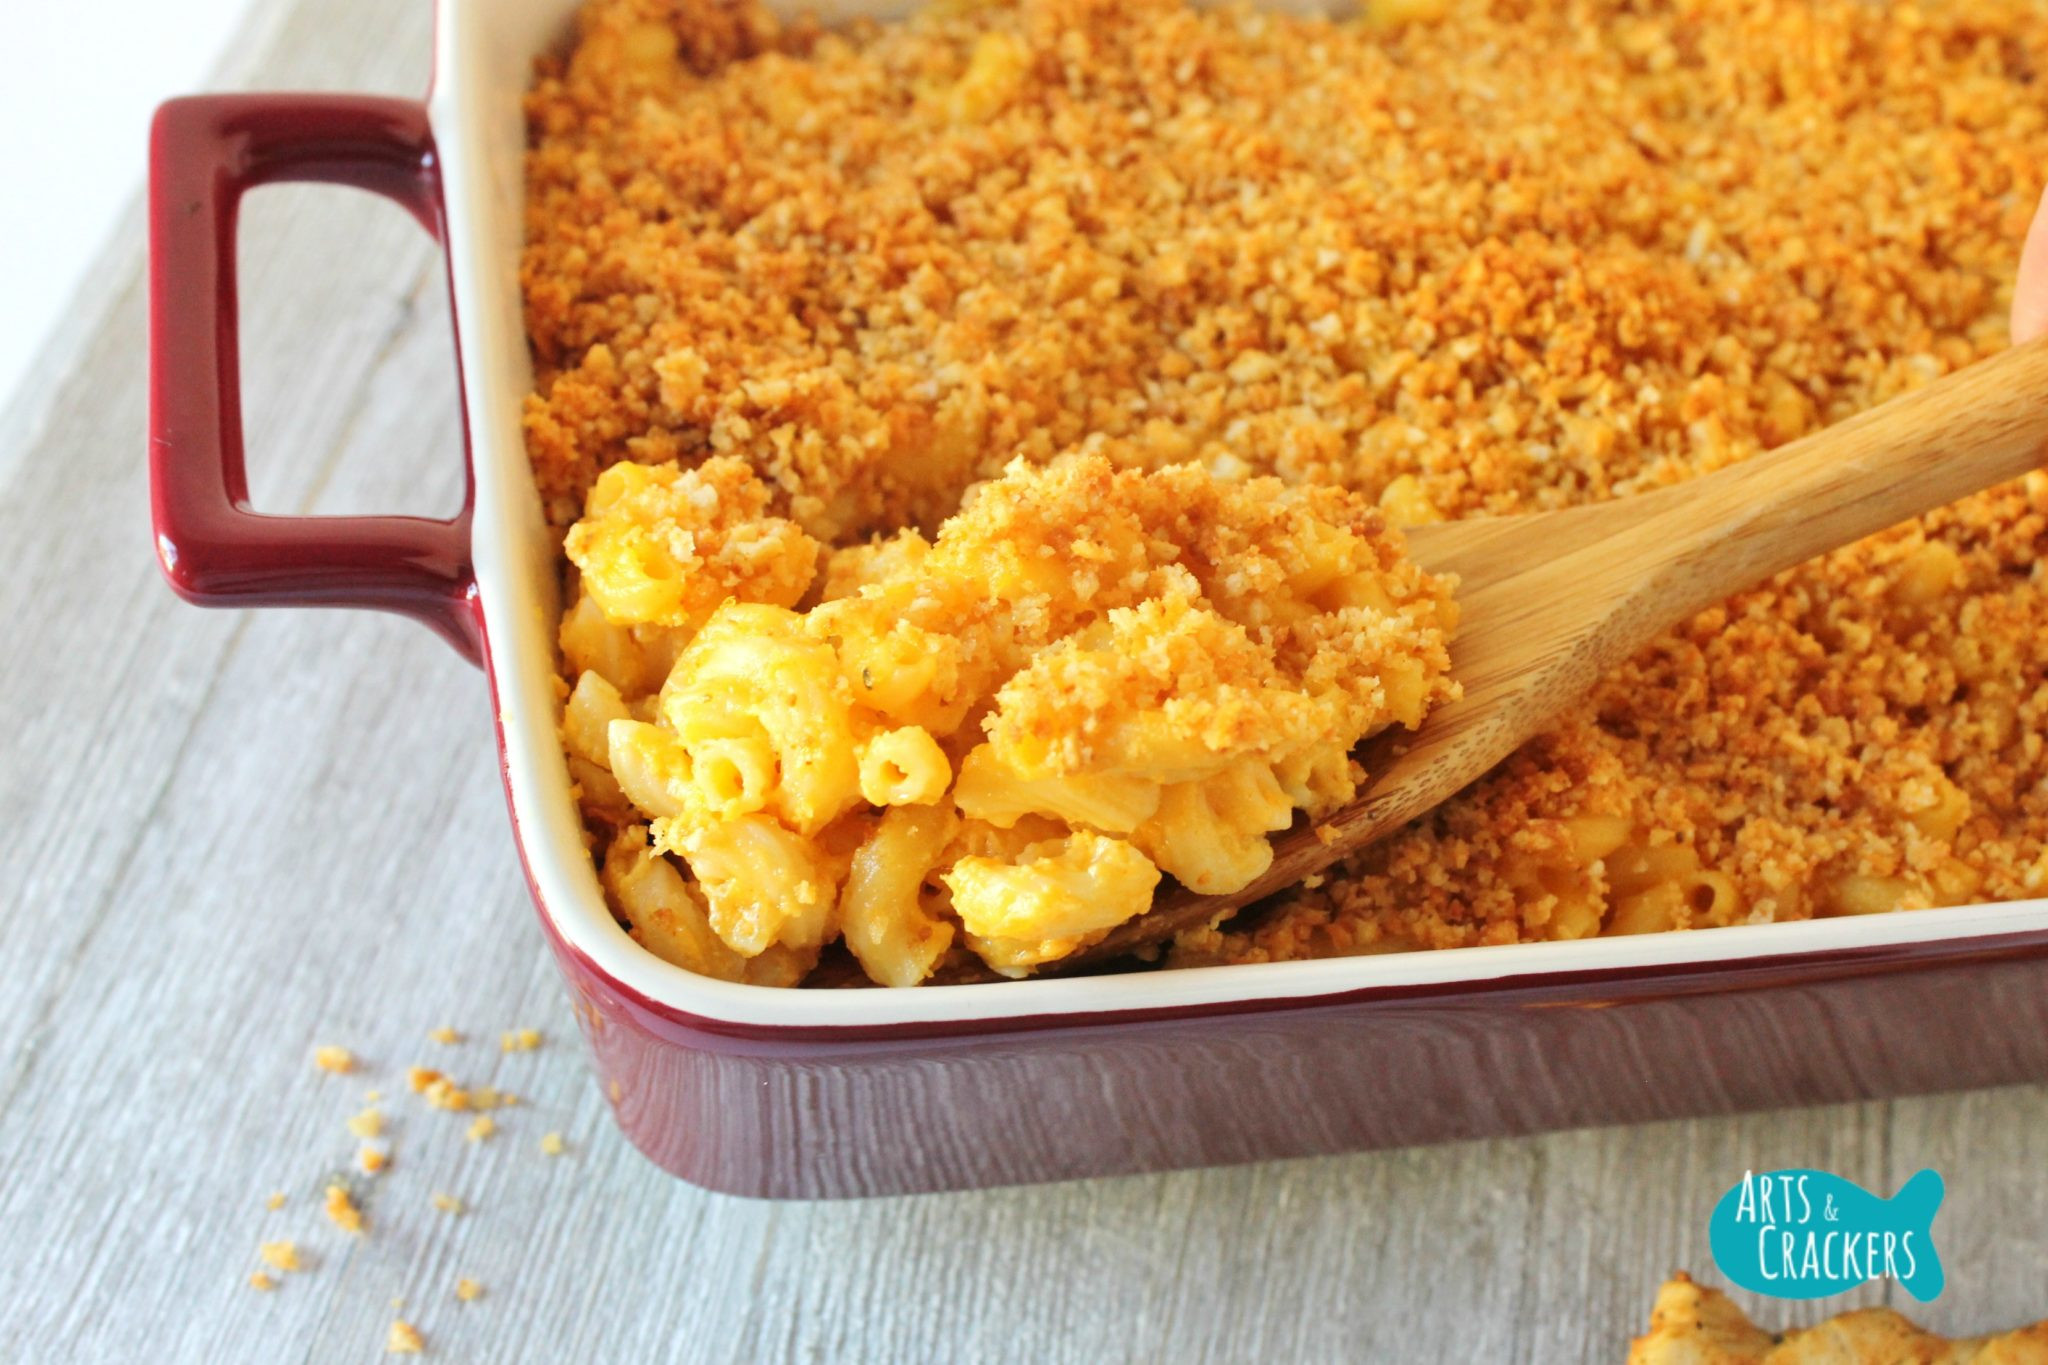 baked macaroni and cheese with bread crumbs recipe